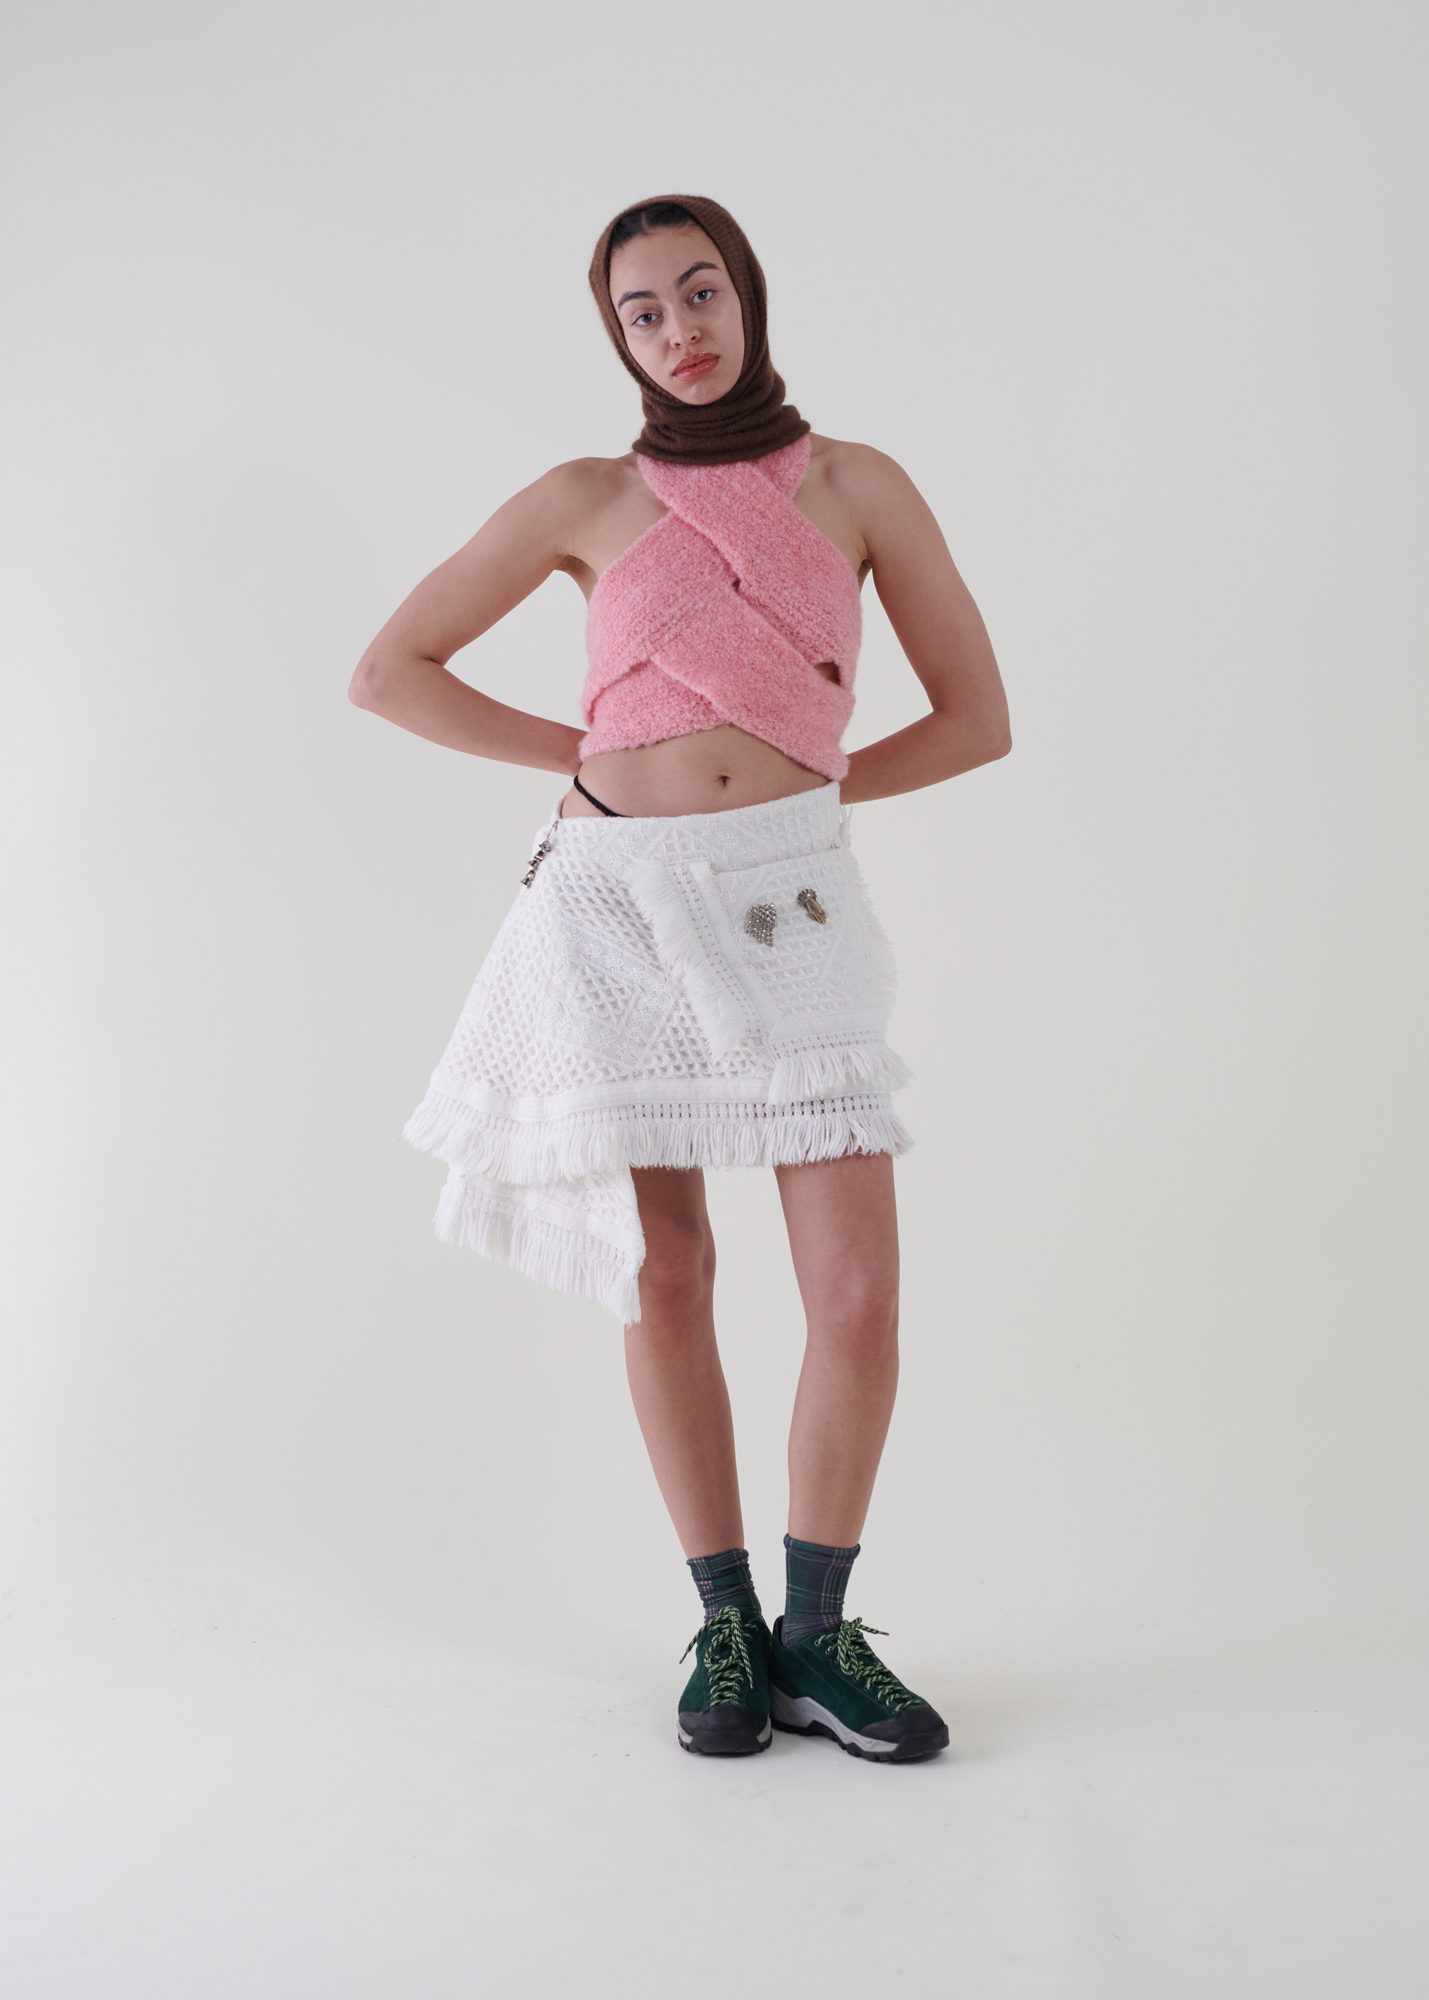 Sustainable fashion with upcycled mohair jersey from Aldwin Teva William